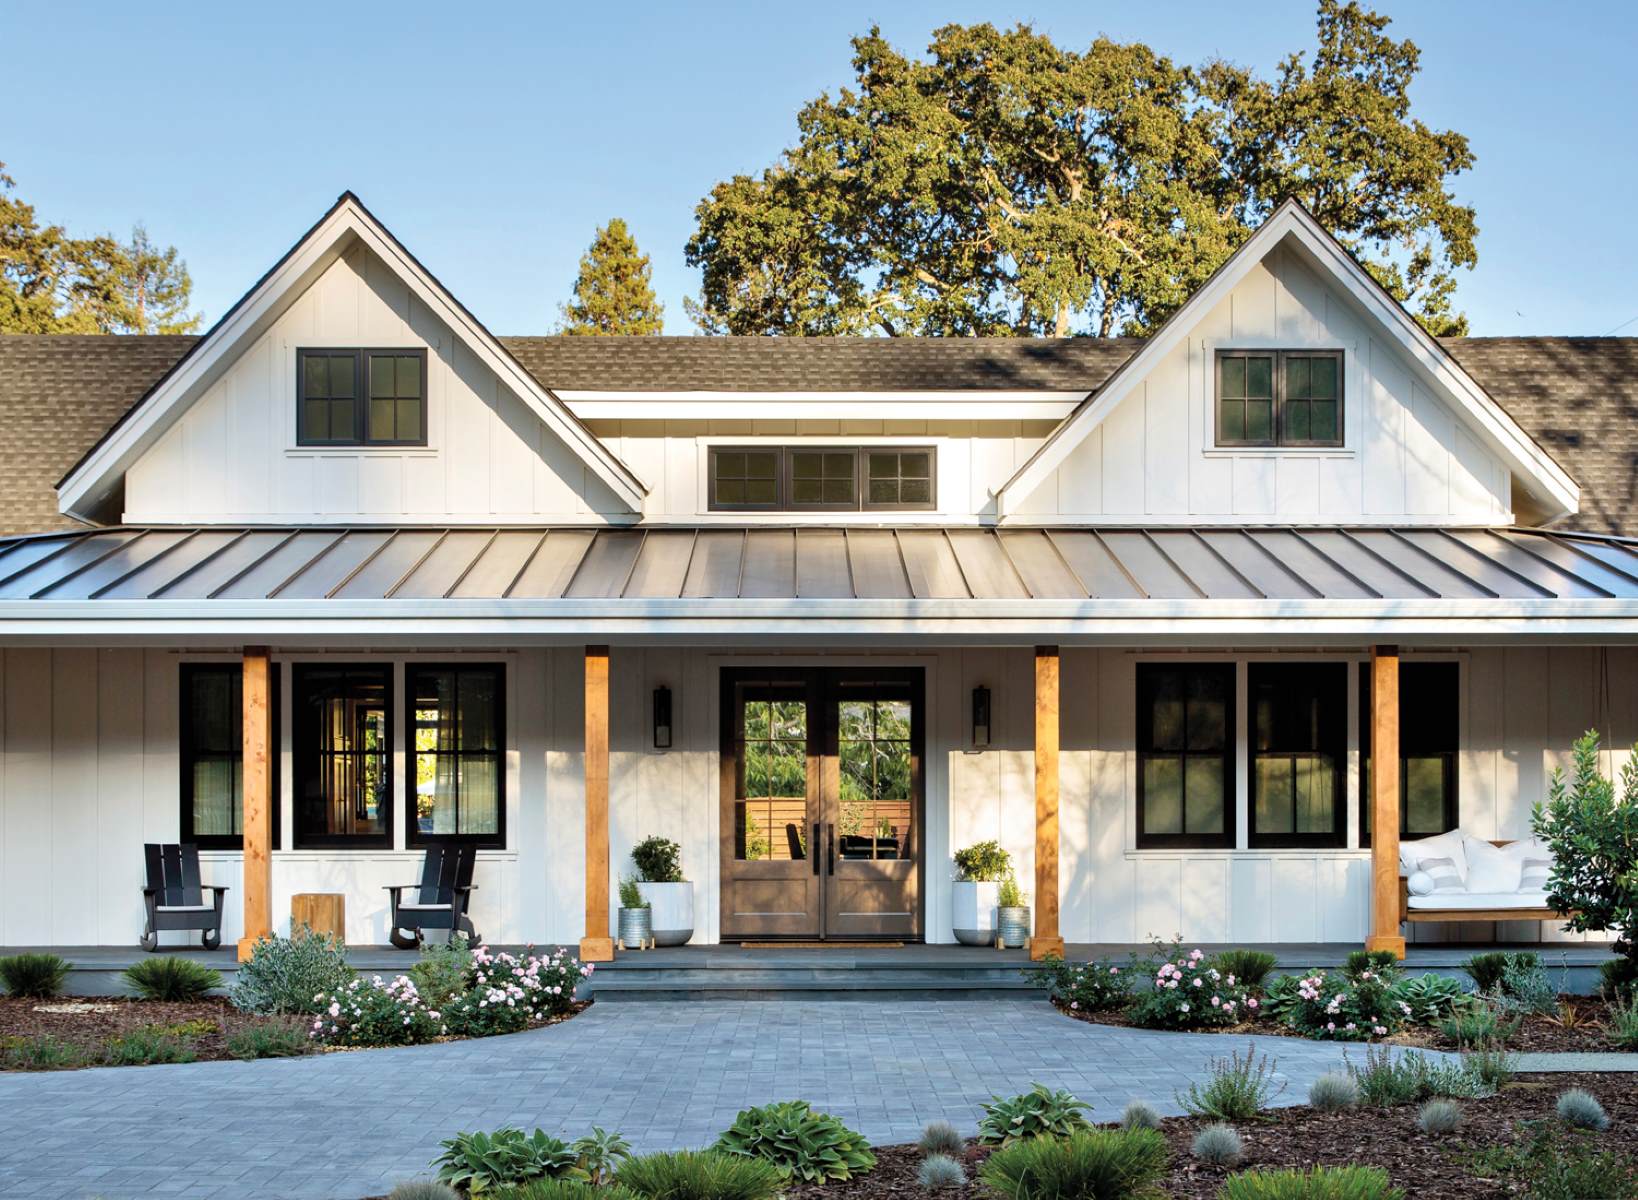 What Does Modern Farmhouse Design Look Like